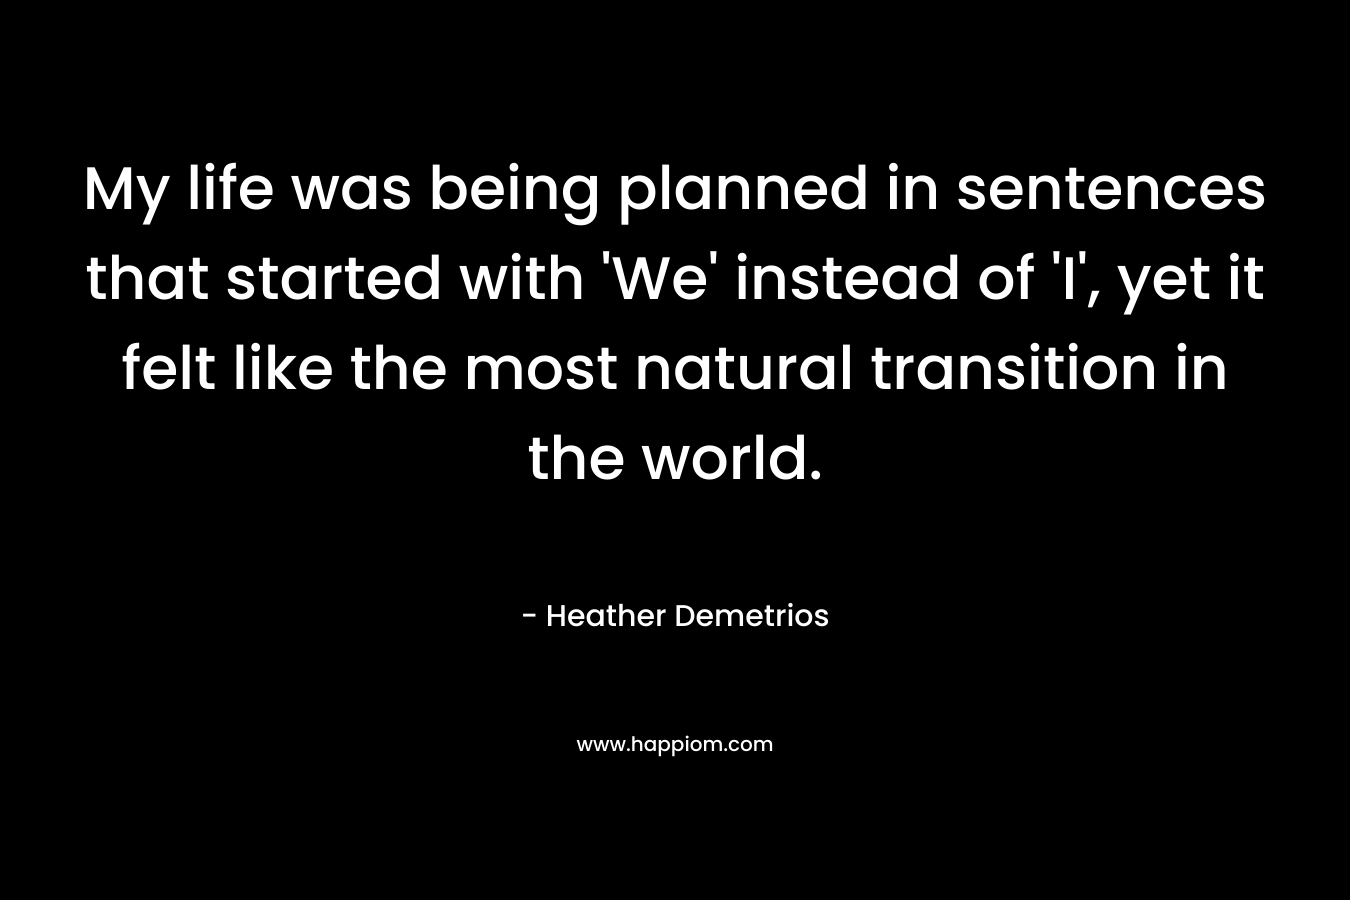 My life was being planned in sentences that started with ‘We’ instead of ‘I’, yet it felt like the most natural transition in the world. – Heather Demetrios